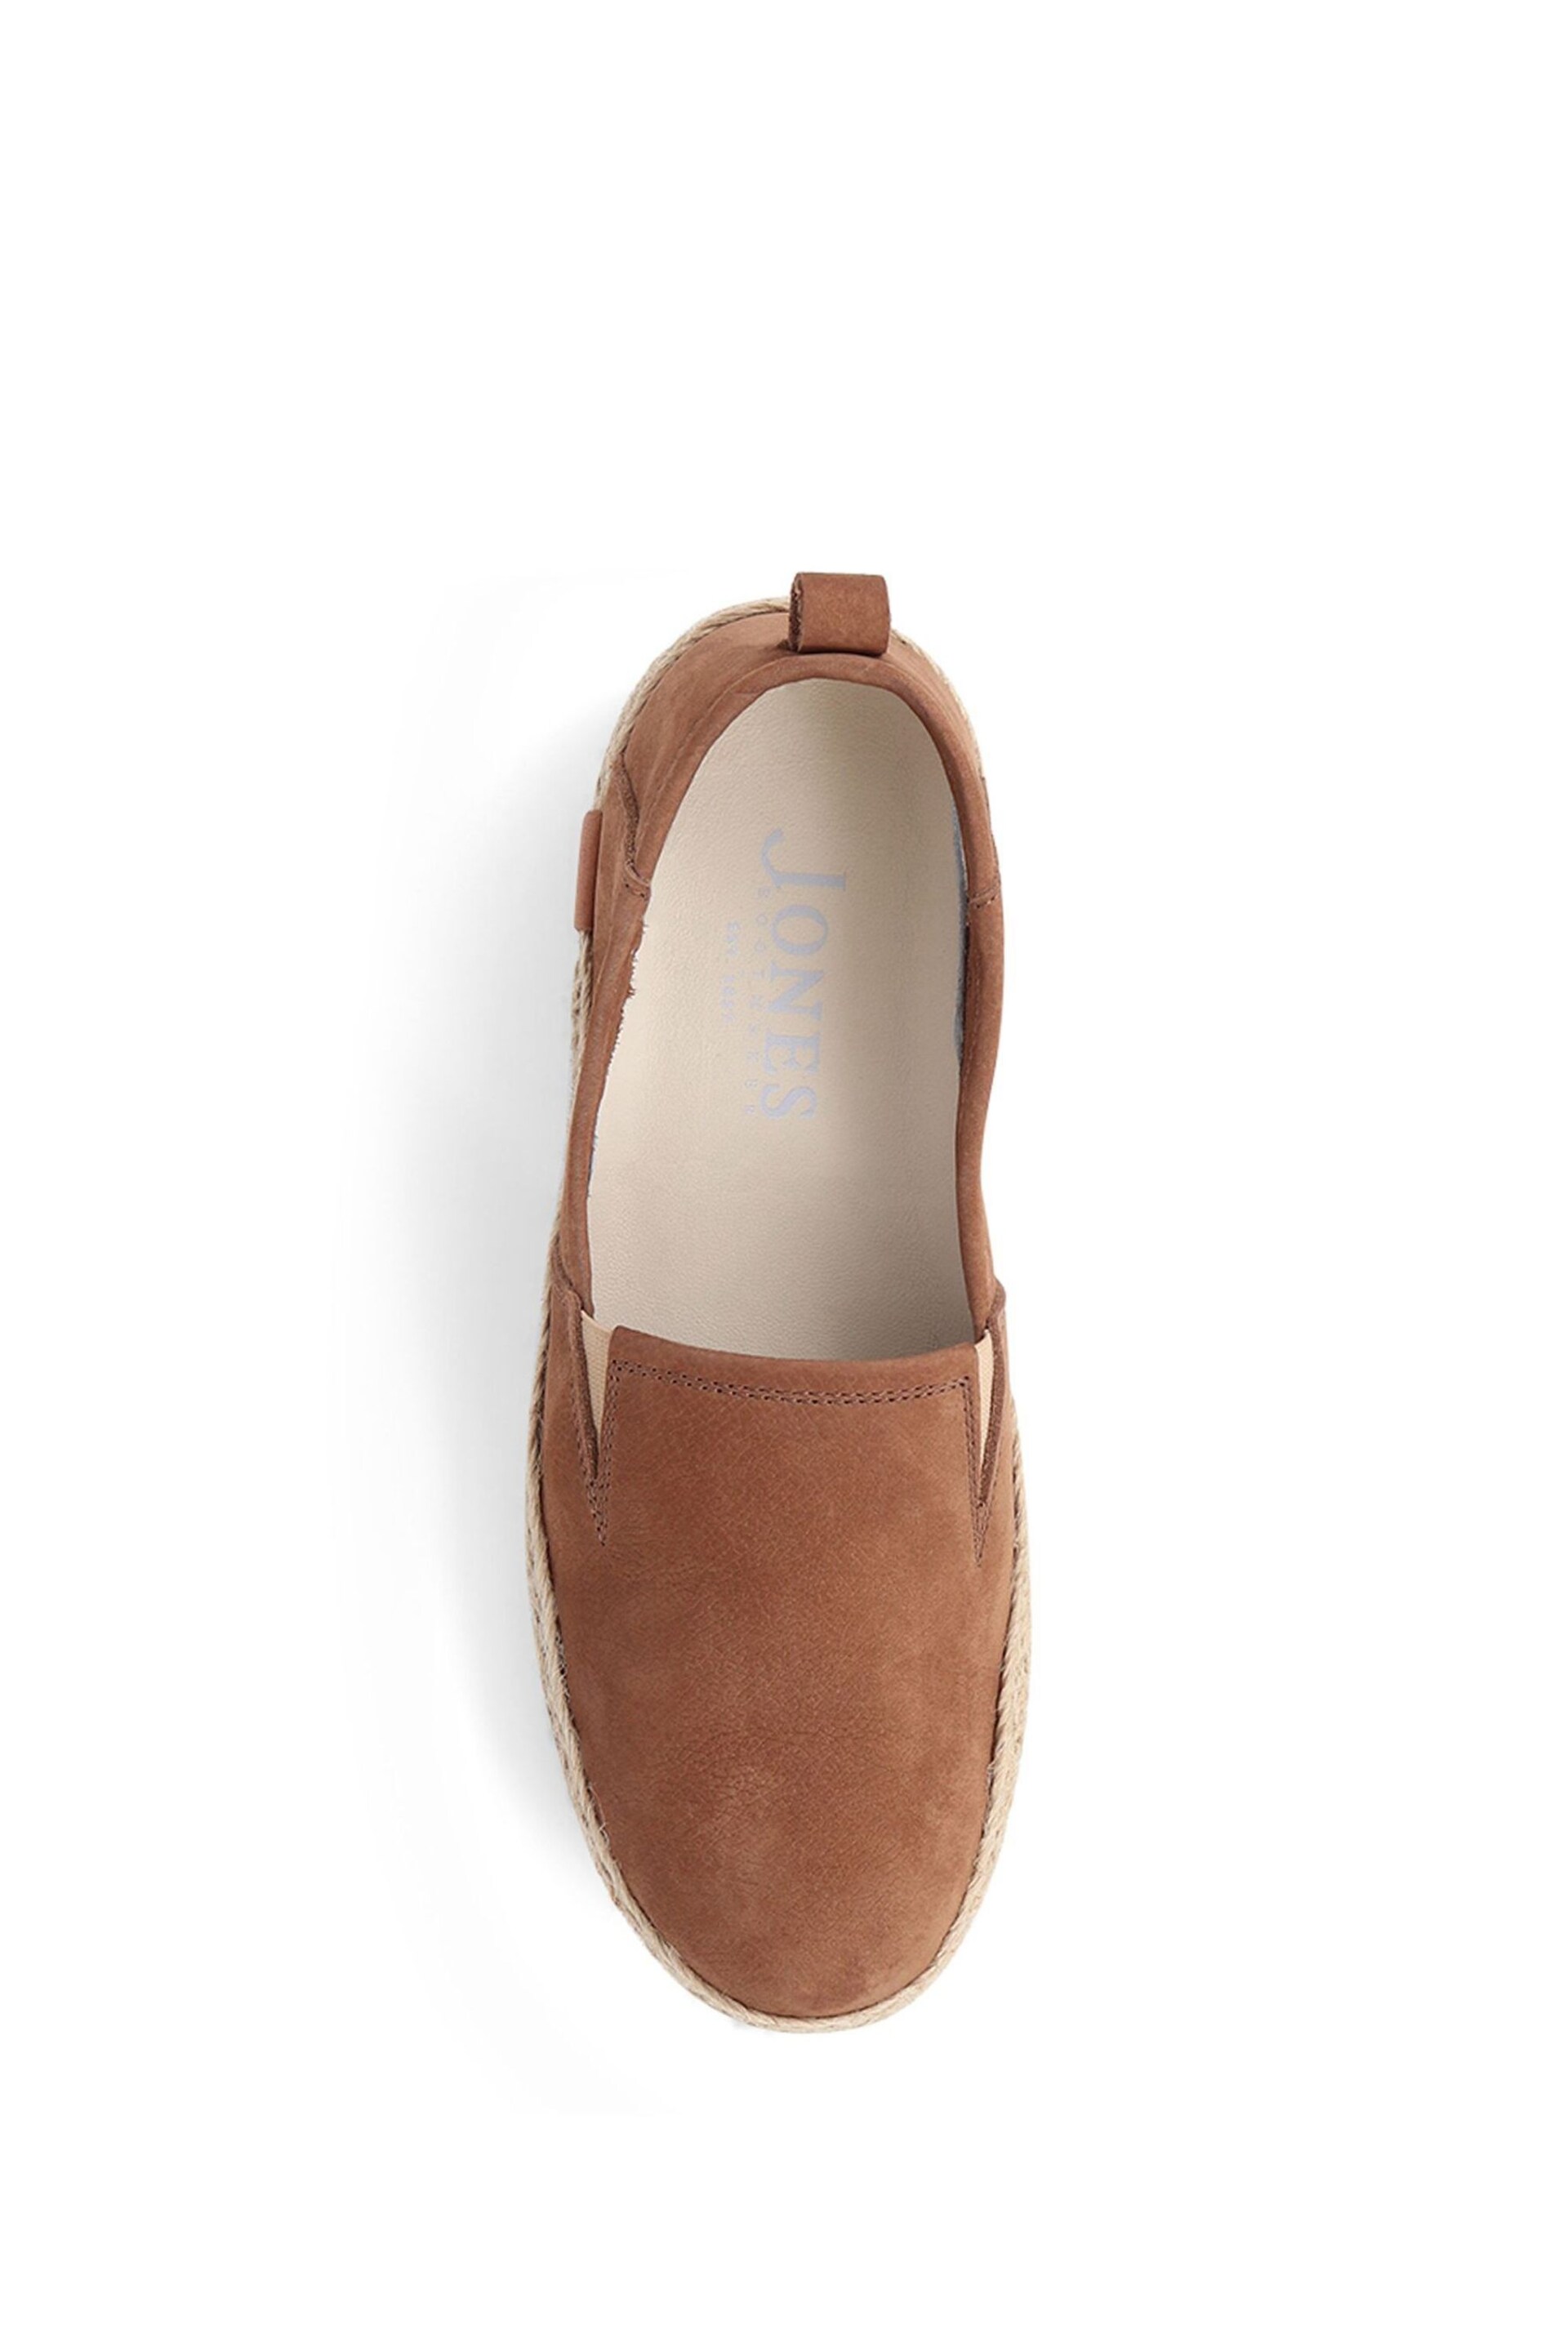 Pavers Natural Milan Leather Espadrille Flats - Image 4 of 5